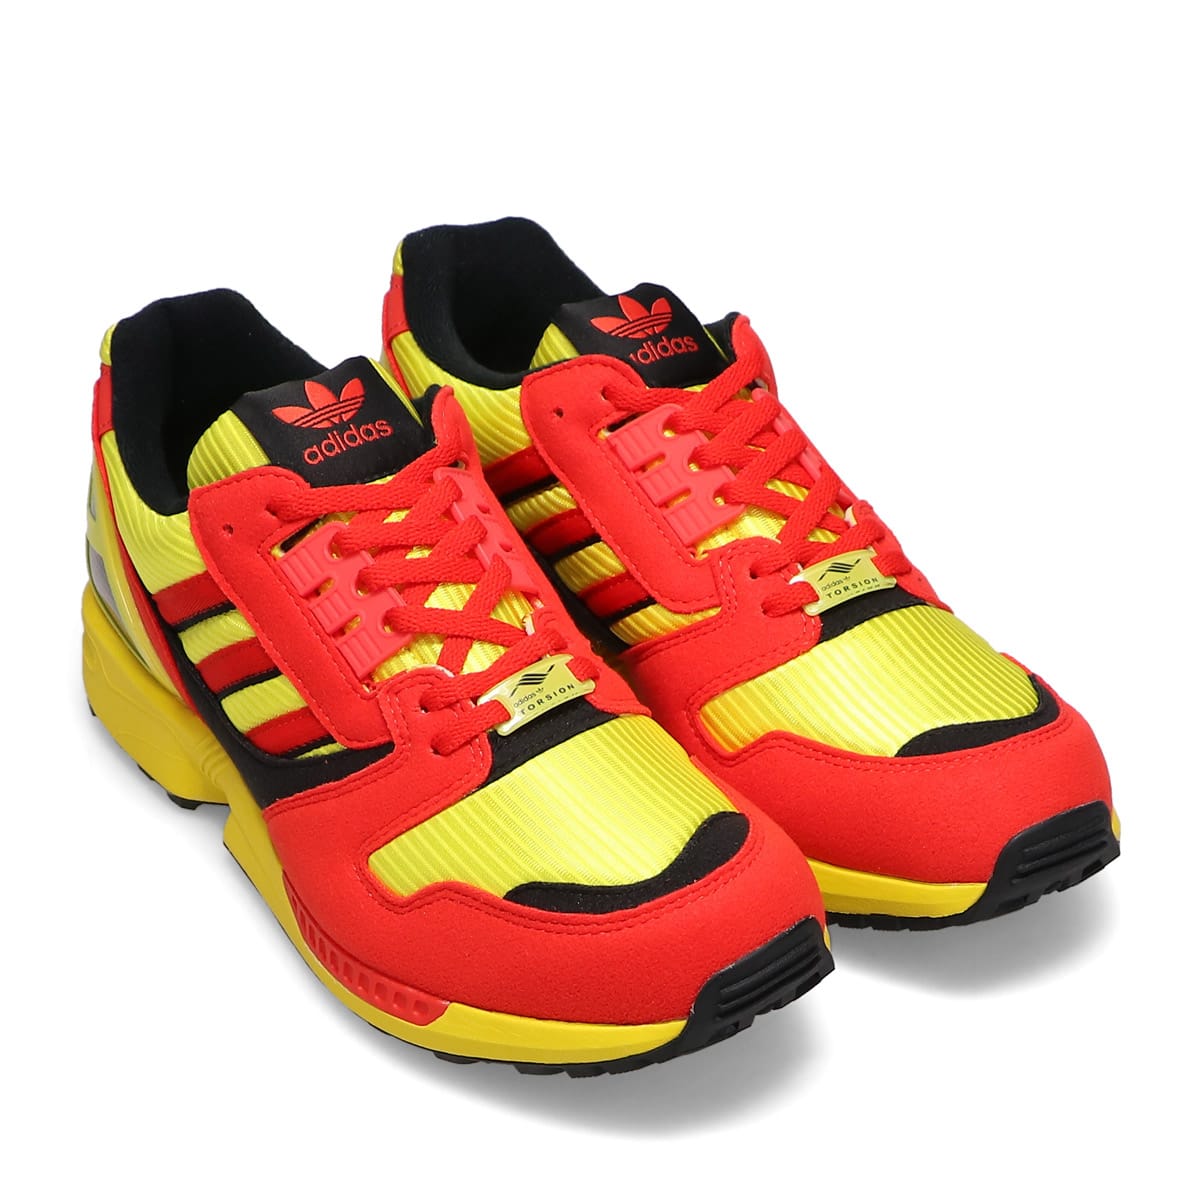 adidas ZX 8000 Germany BRIGHT YELLOW/CORE BLACK/RED 22SS-S